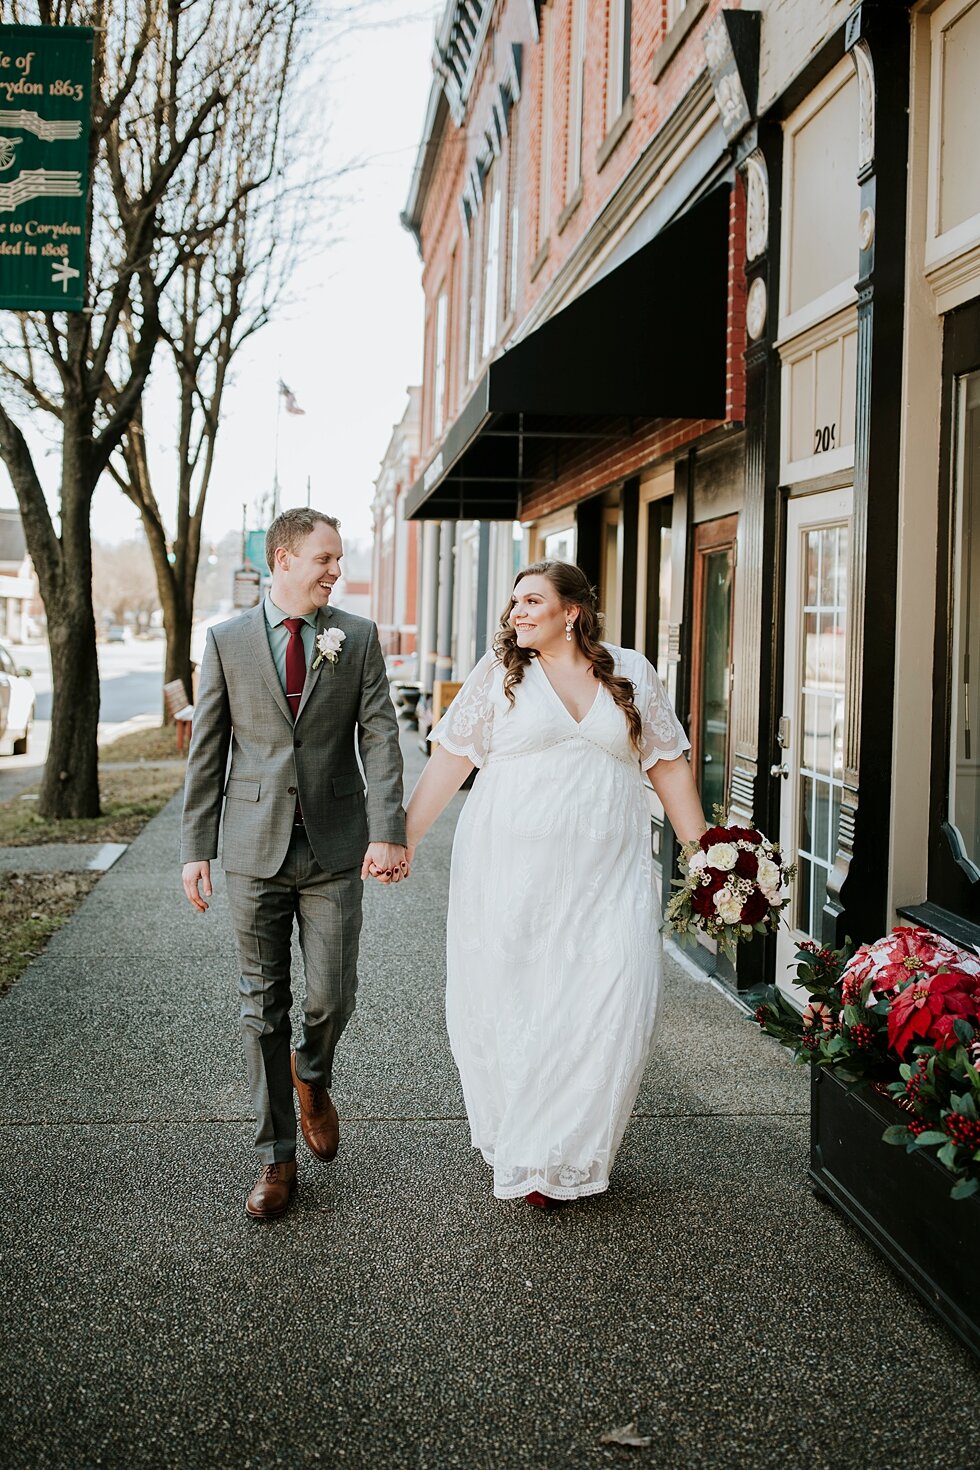  Walking hand in hand down historic downtown Corydon, Indiana just hours before they tied the knot as husband and wife during their intimate winter backyard wedding with their closest friends and family. Southern wedding Indiana intimate wedding smal